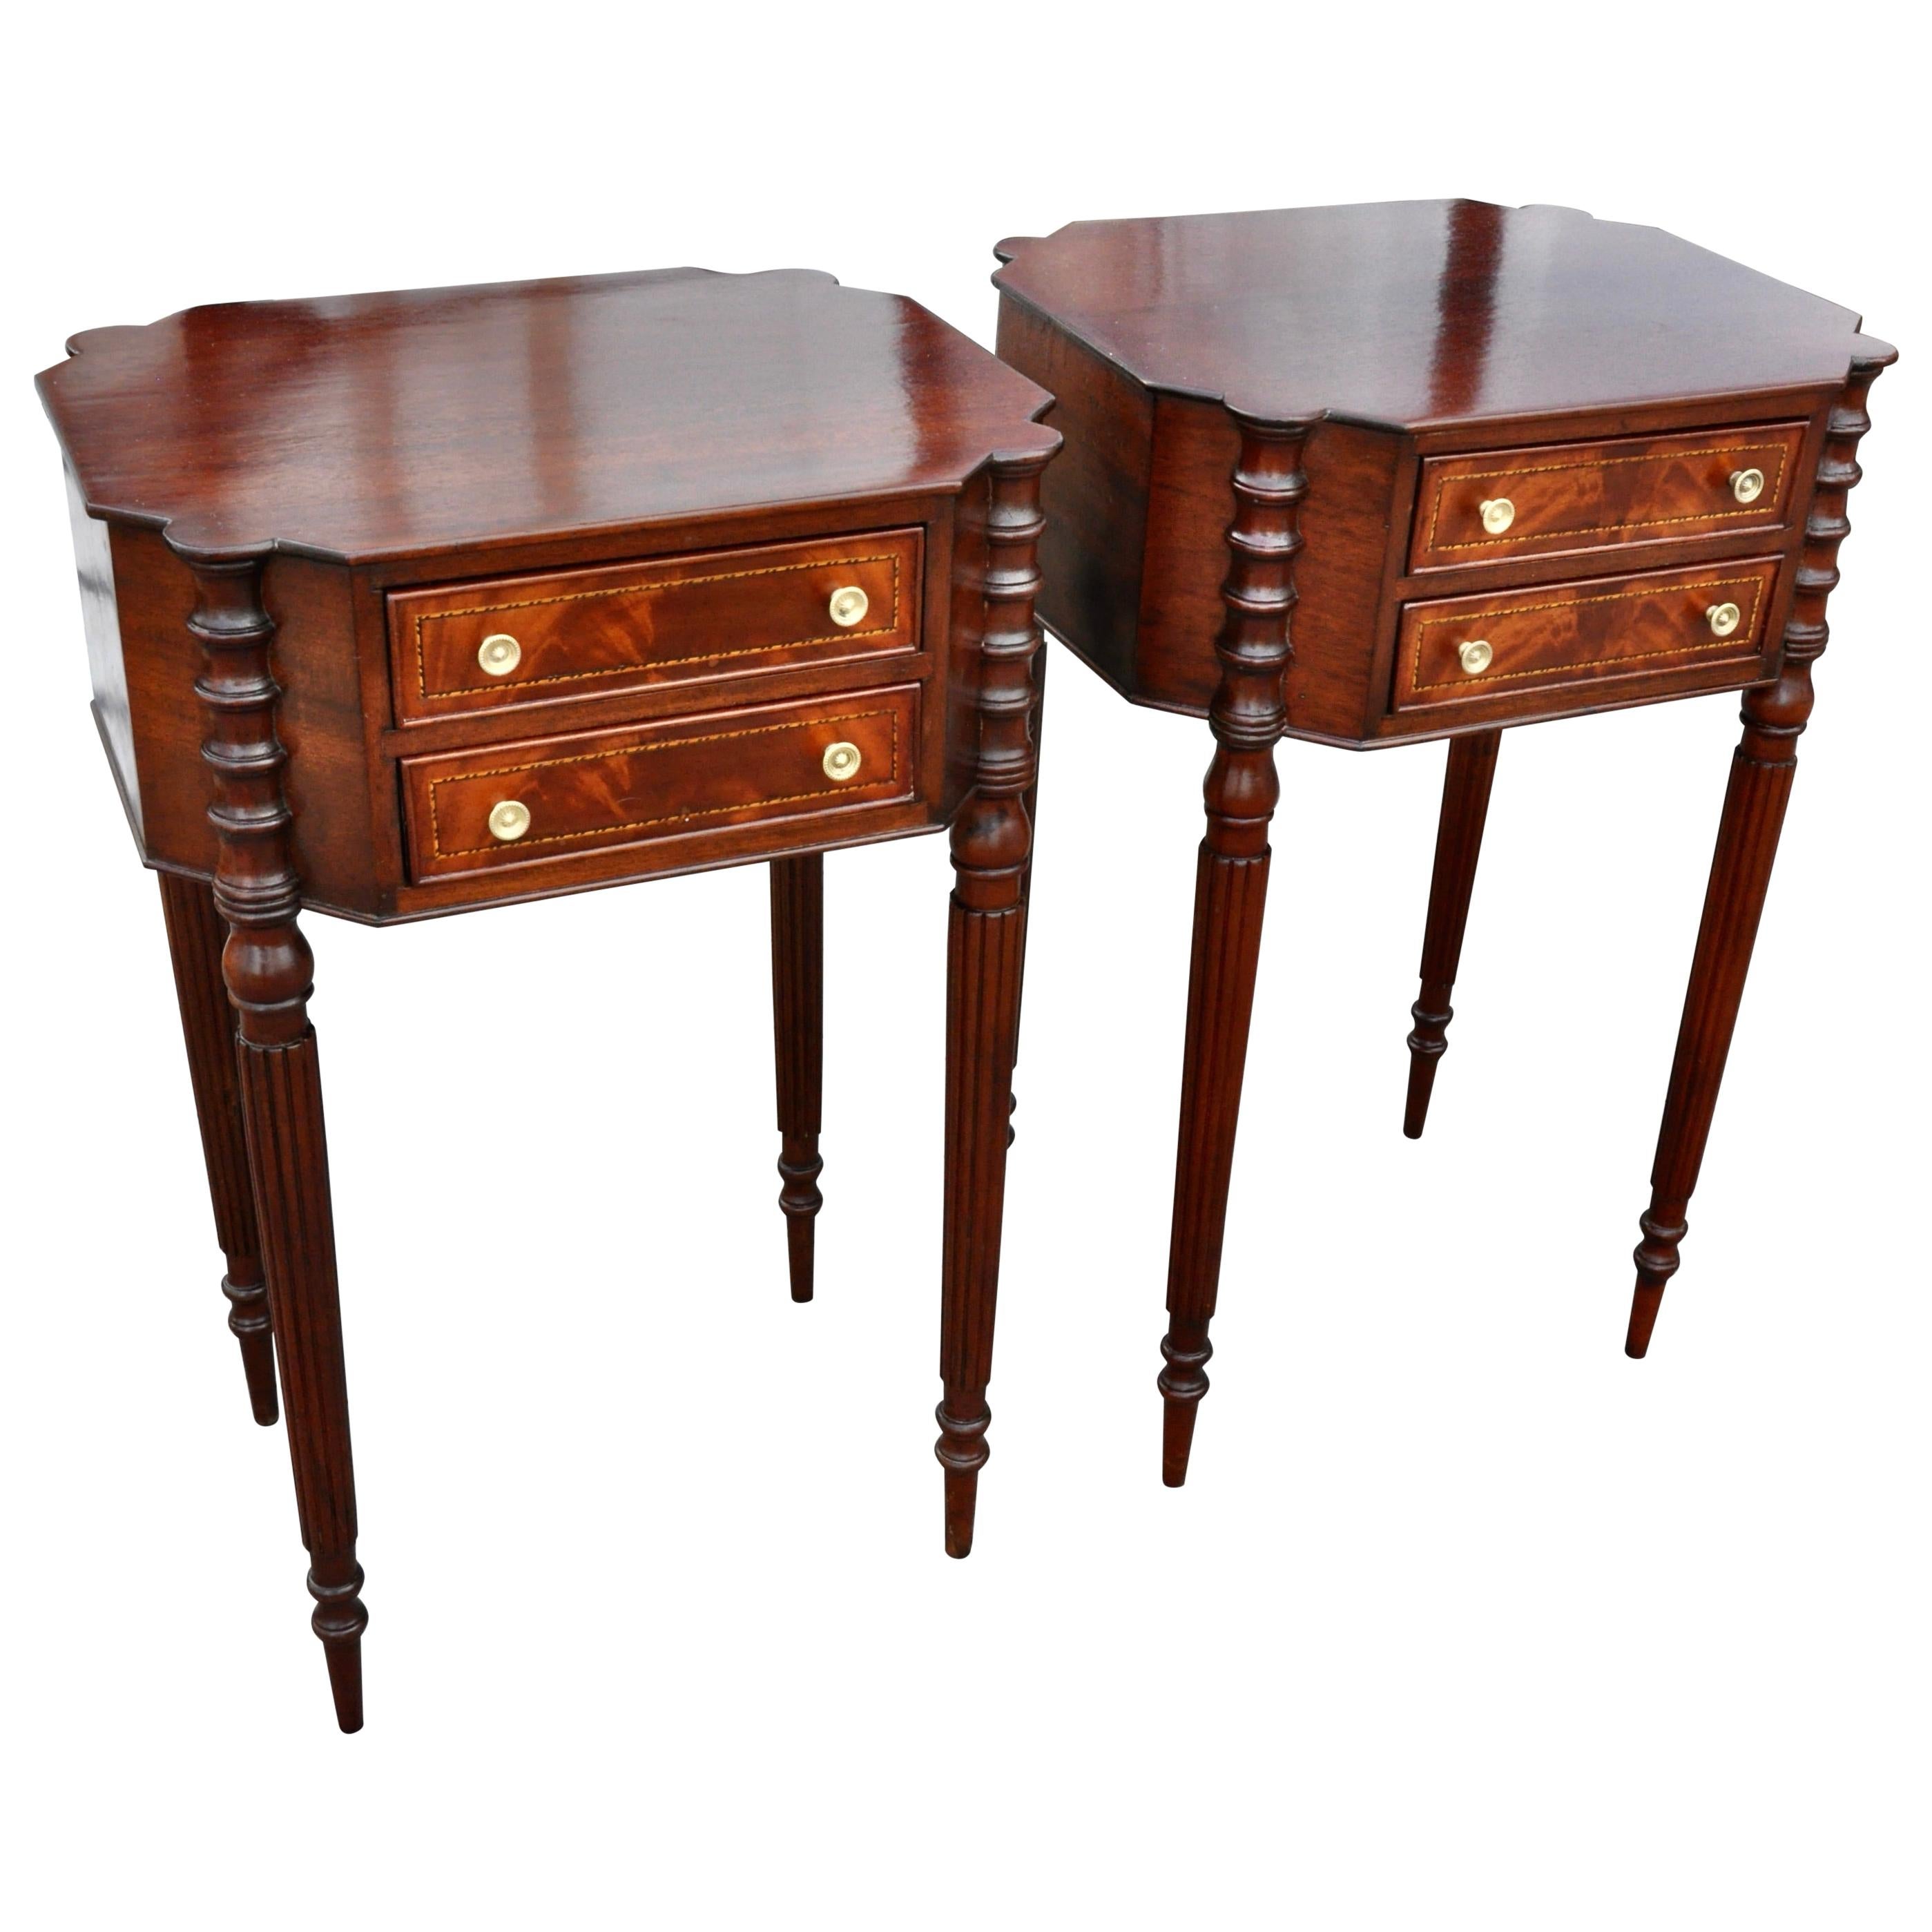 Pair of American Mahogany Federal Style Work End Tables